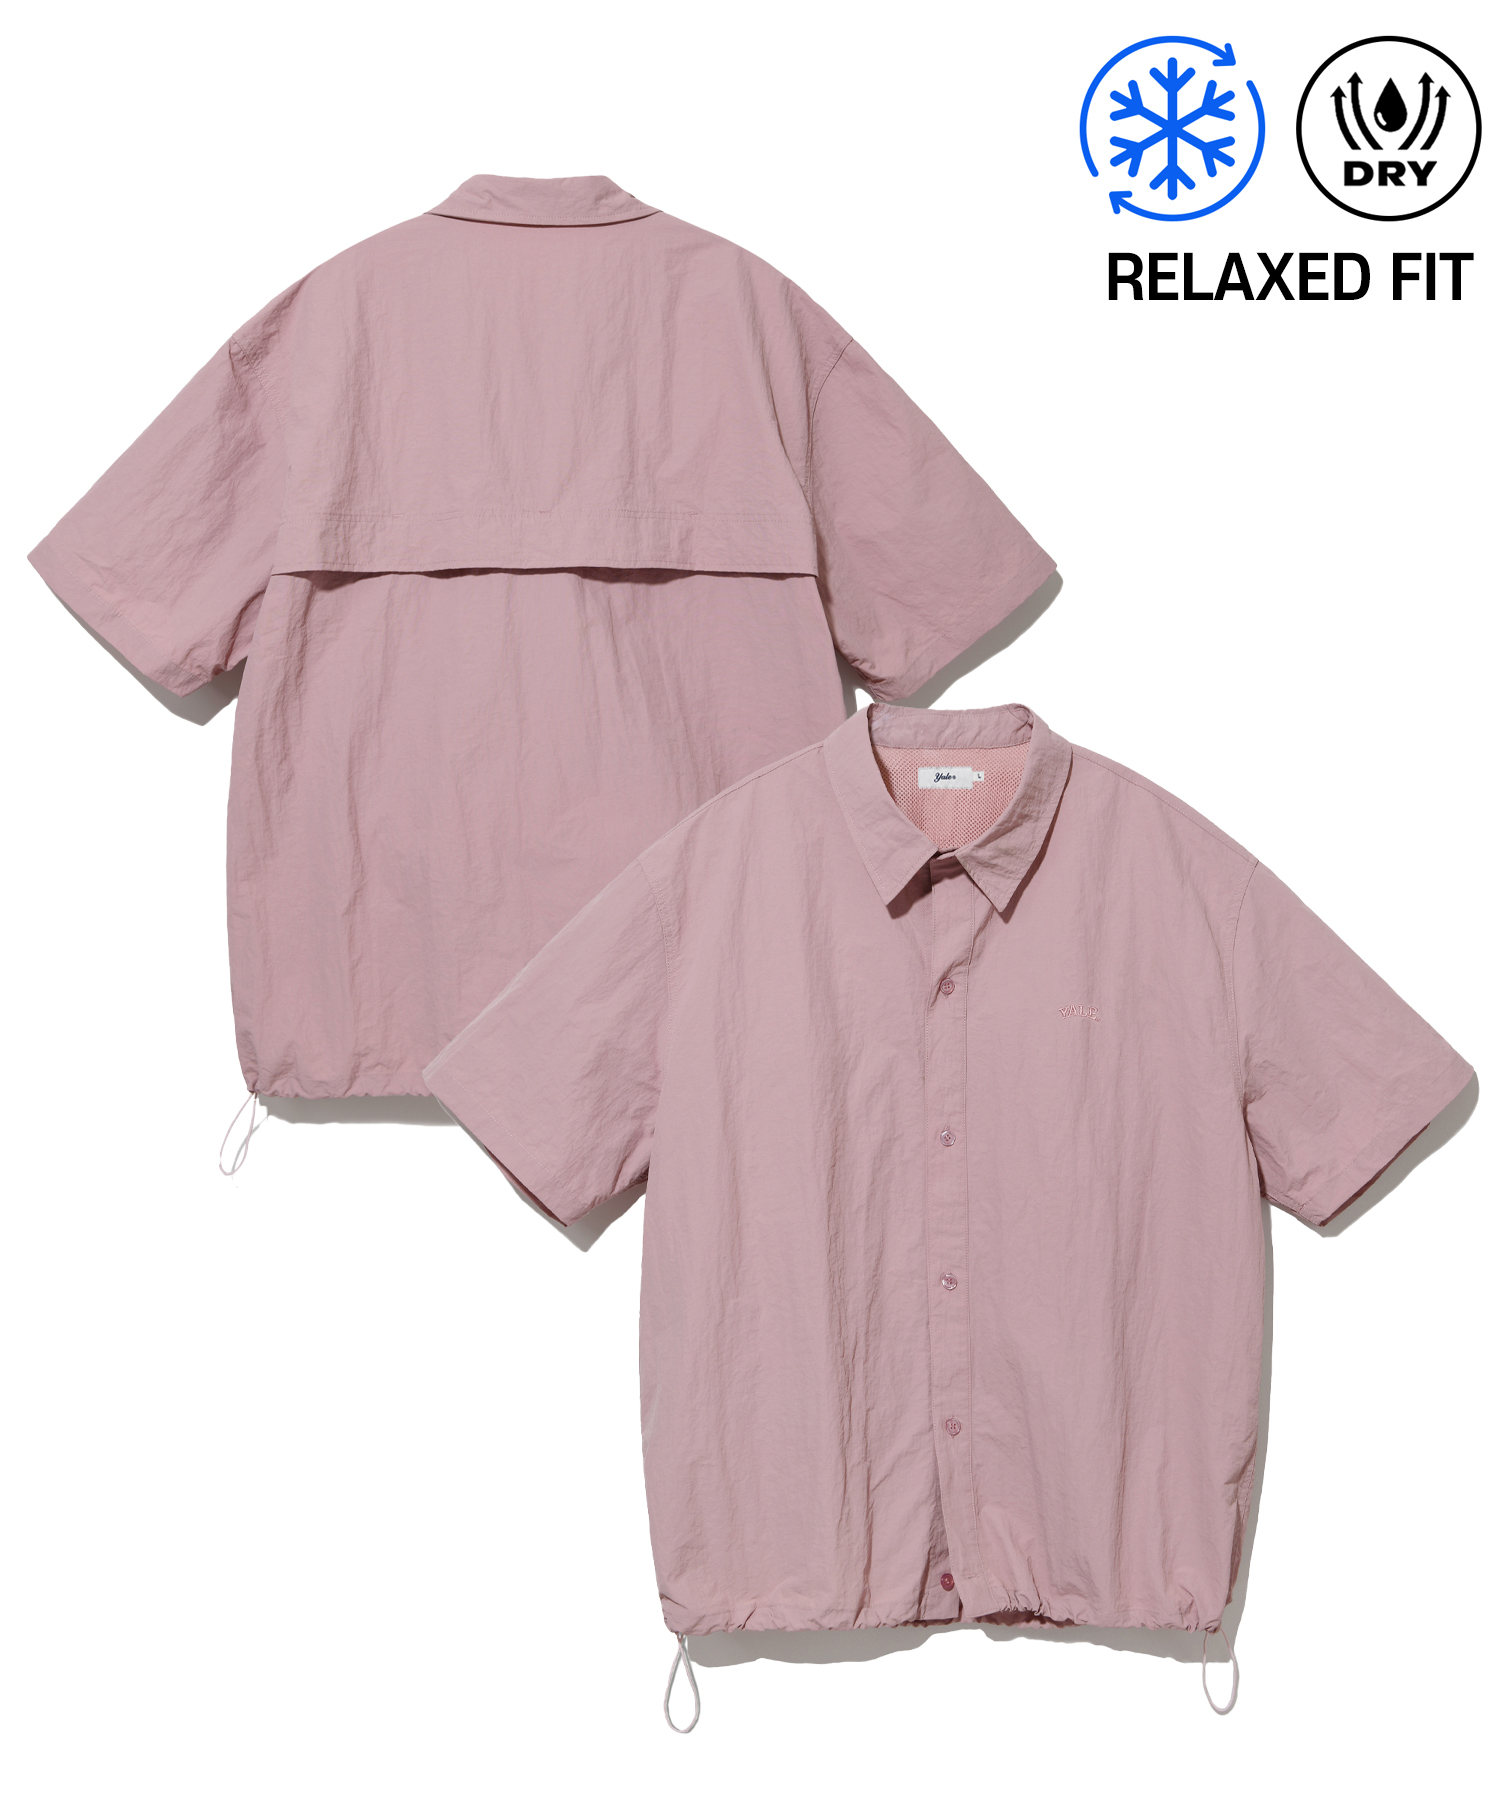 [ONEMILE WEAR] NYLON RELAXED FIT COACH SHIRT VTG PINK